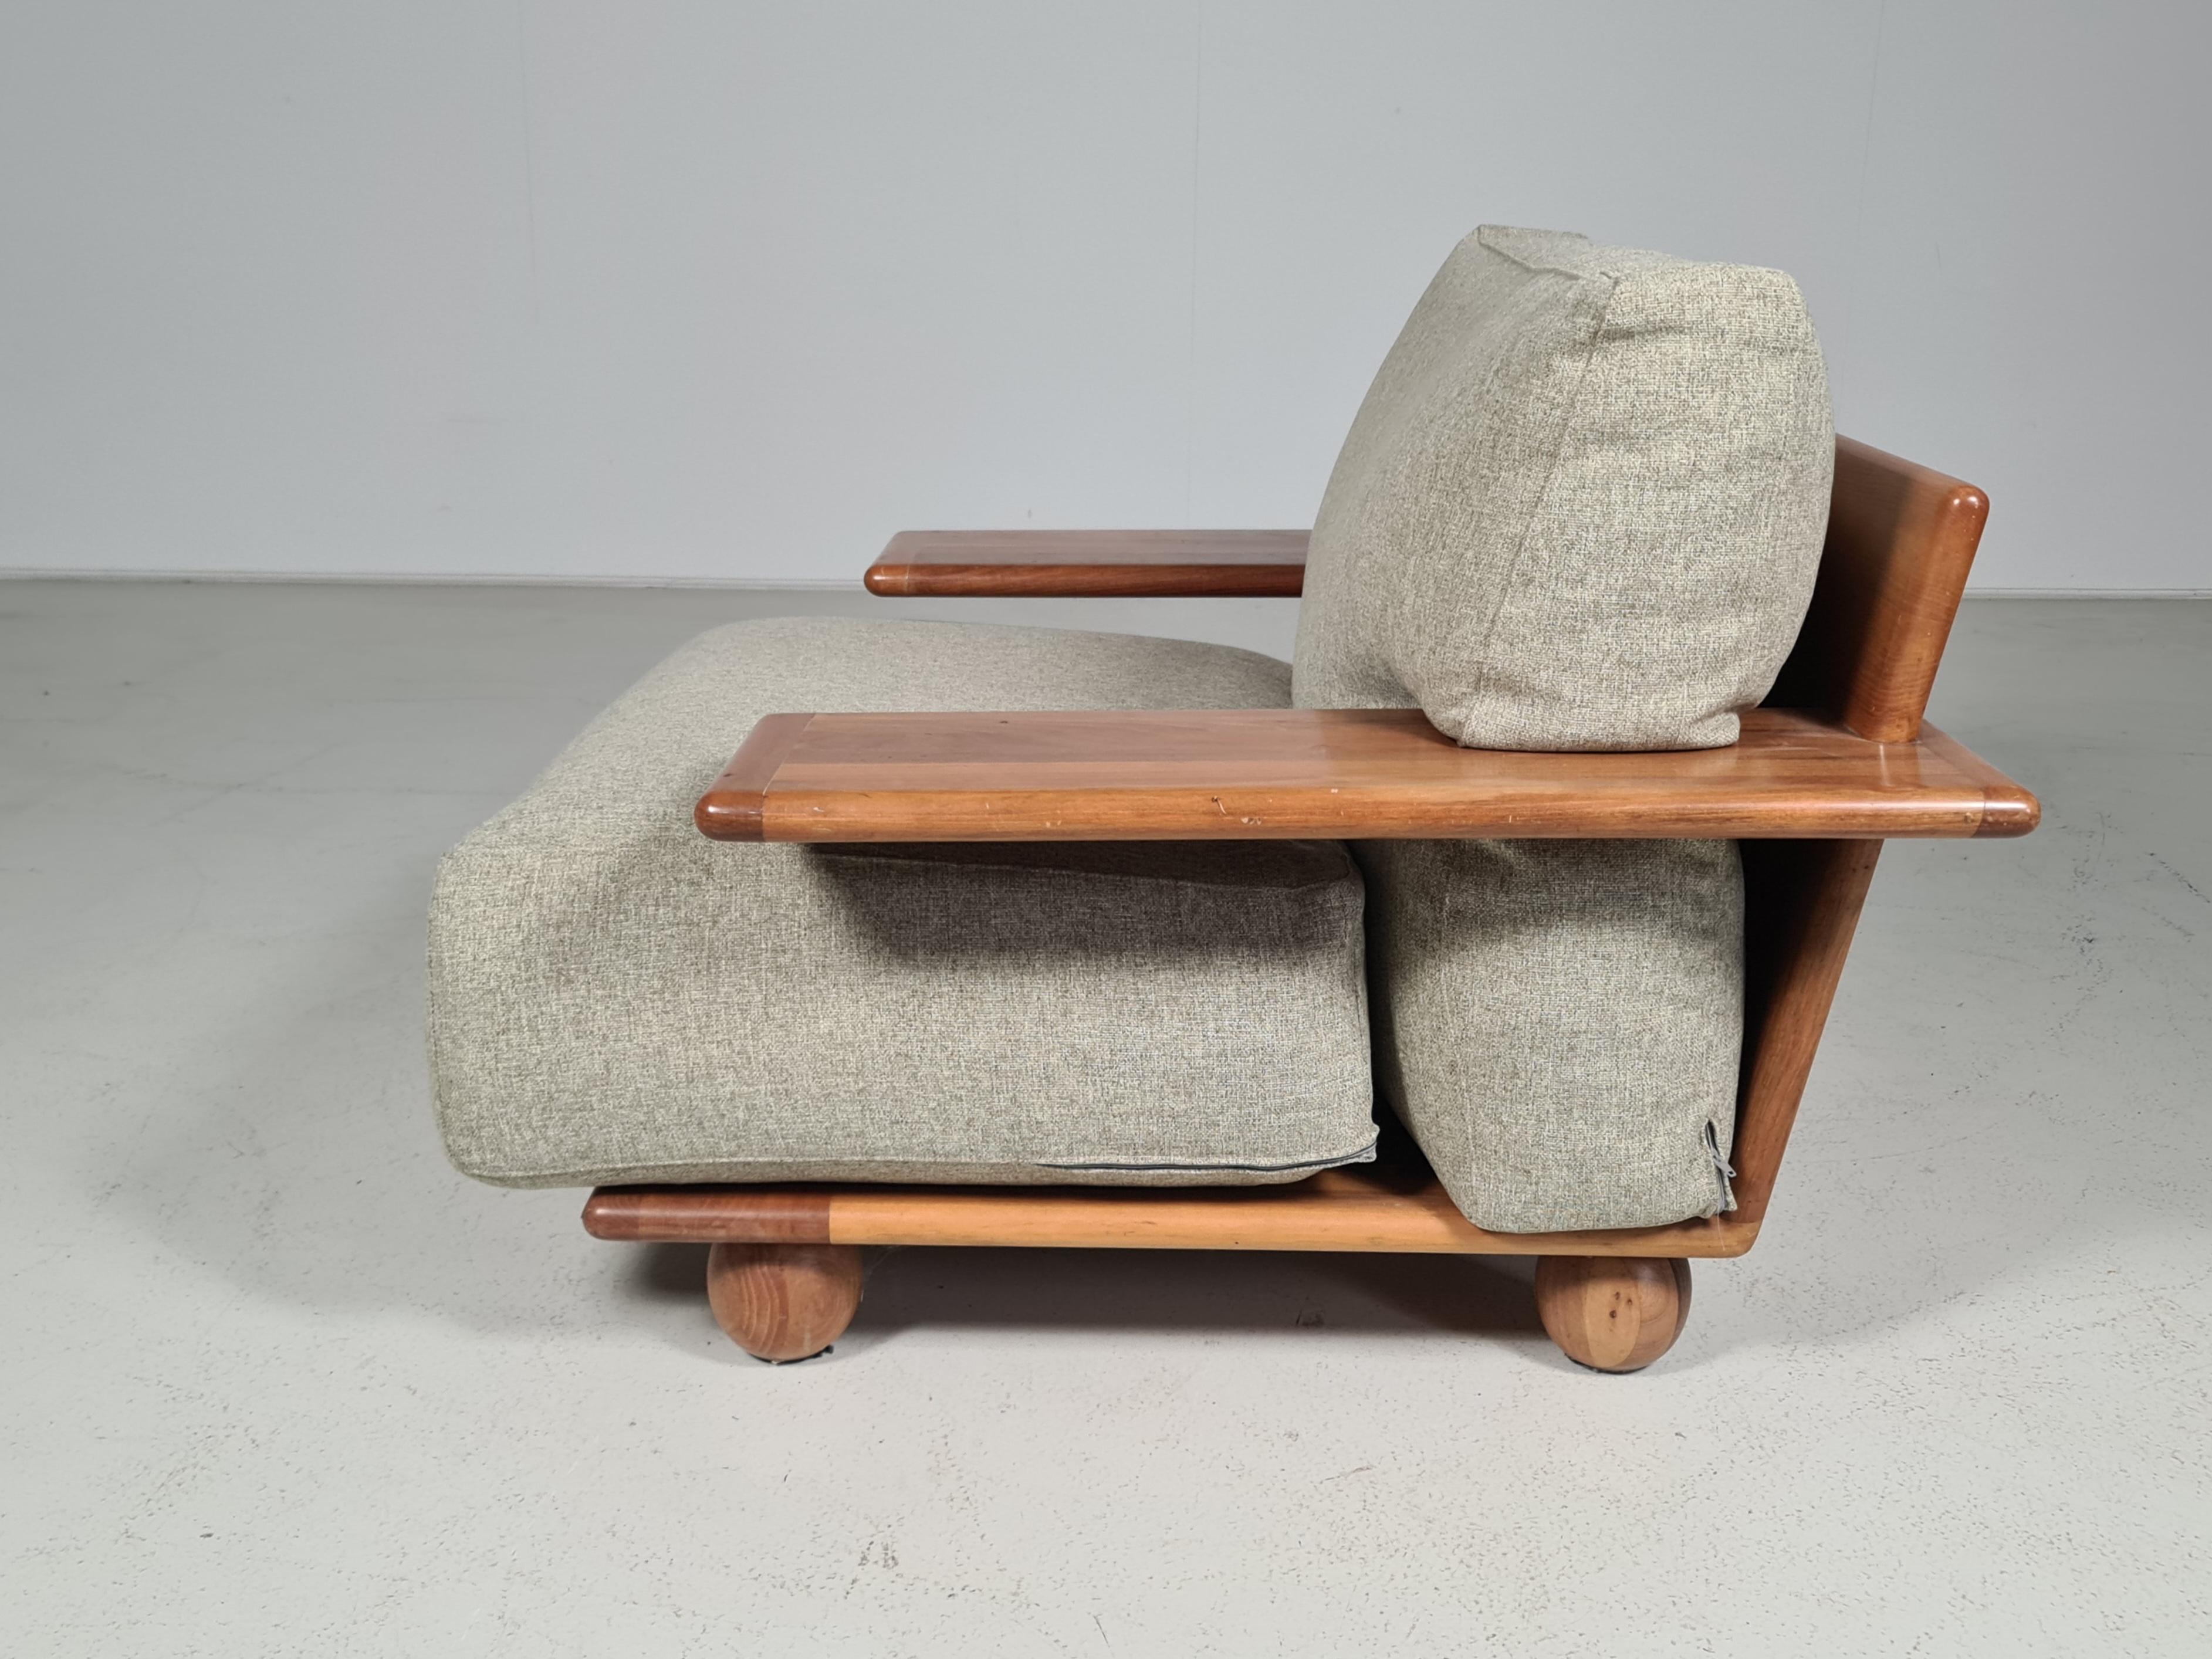 Fantastic high-quality Pianura lounge chair designed by Mario Bellini for Cassina, Italy 1971. It has a solid walnut wood frame and solid walnut legs. The wood makes the design really stand out. The cushions are reupholstered in a cotton/wool fabric.